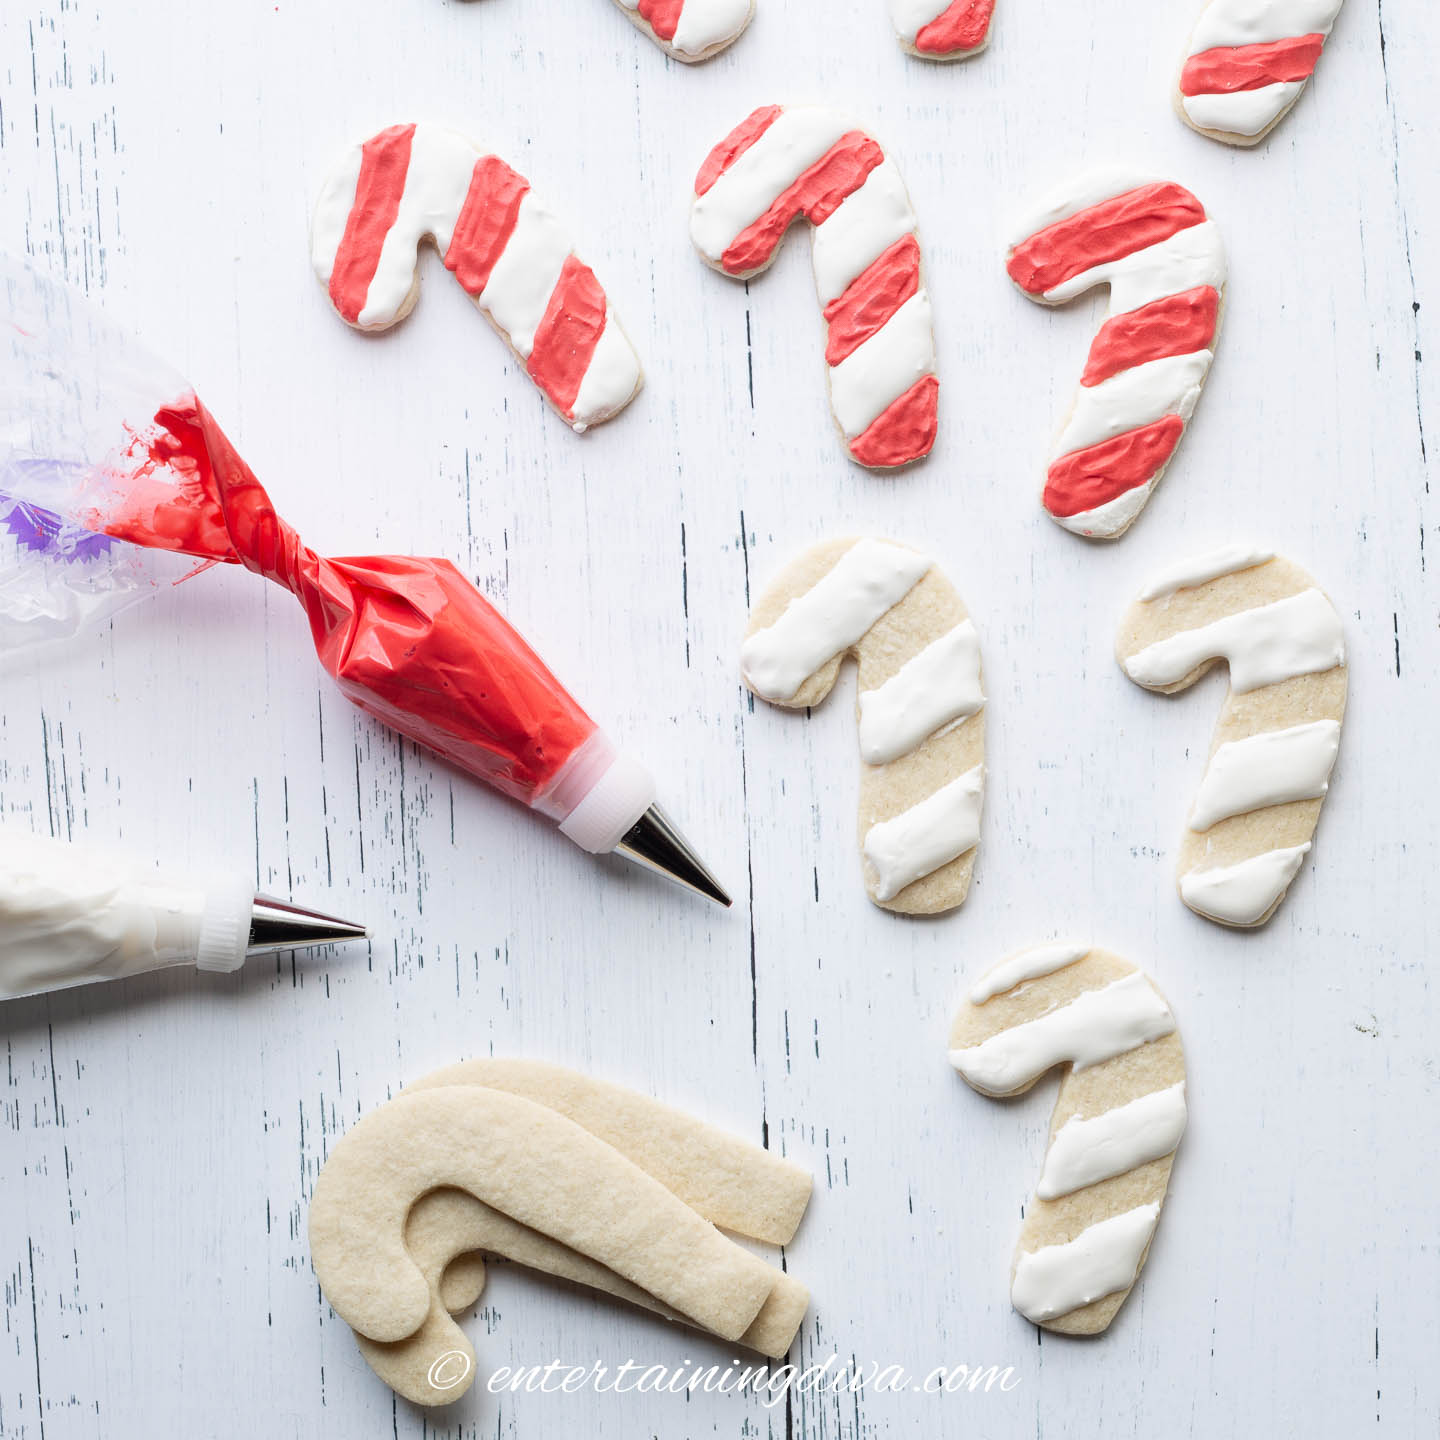 candy cane sugar cookies being decorated with red and white royal icing